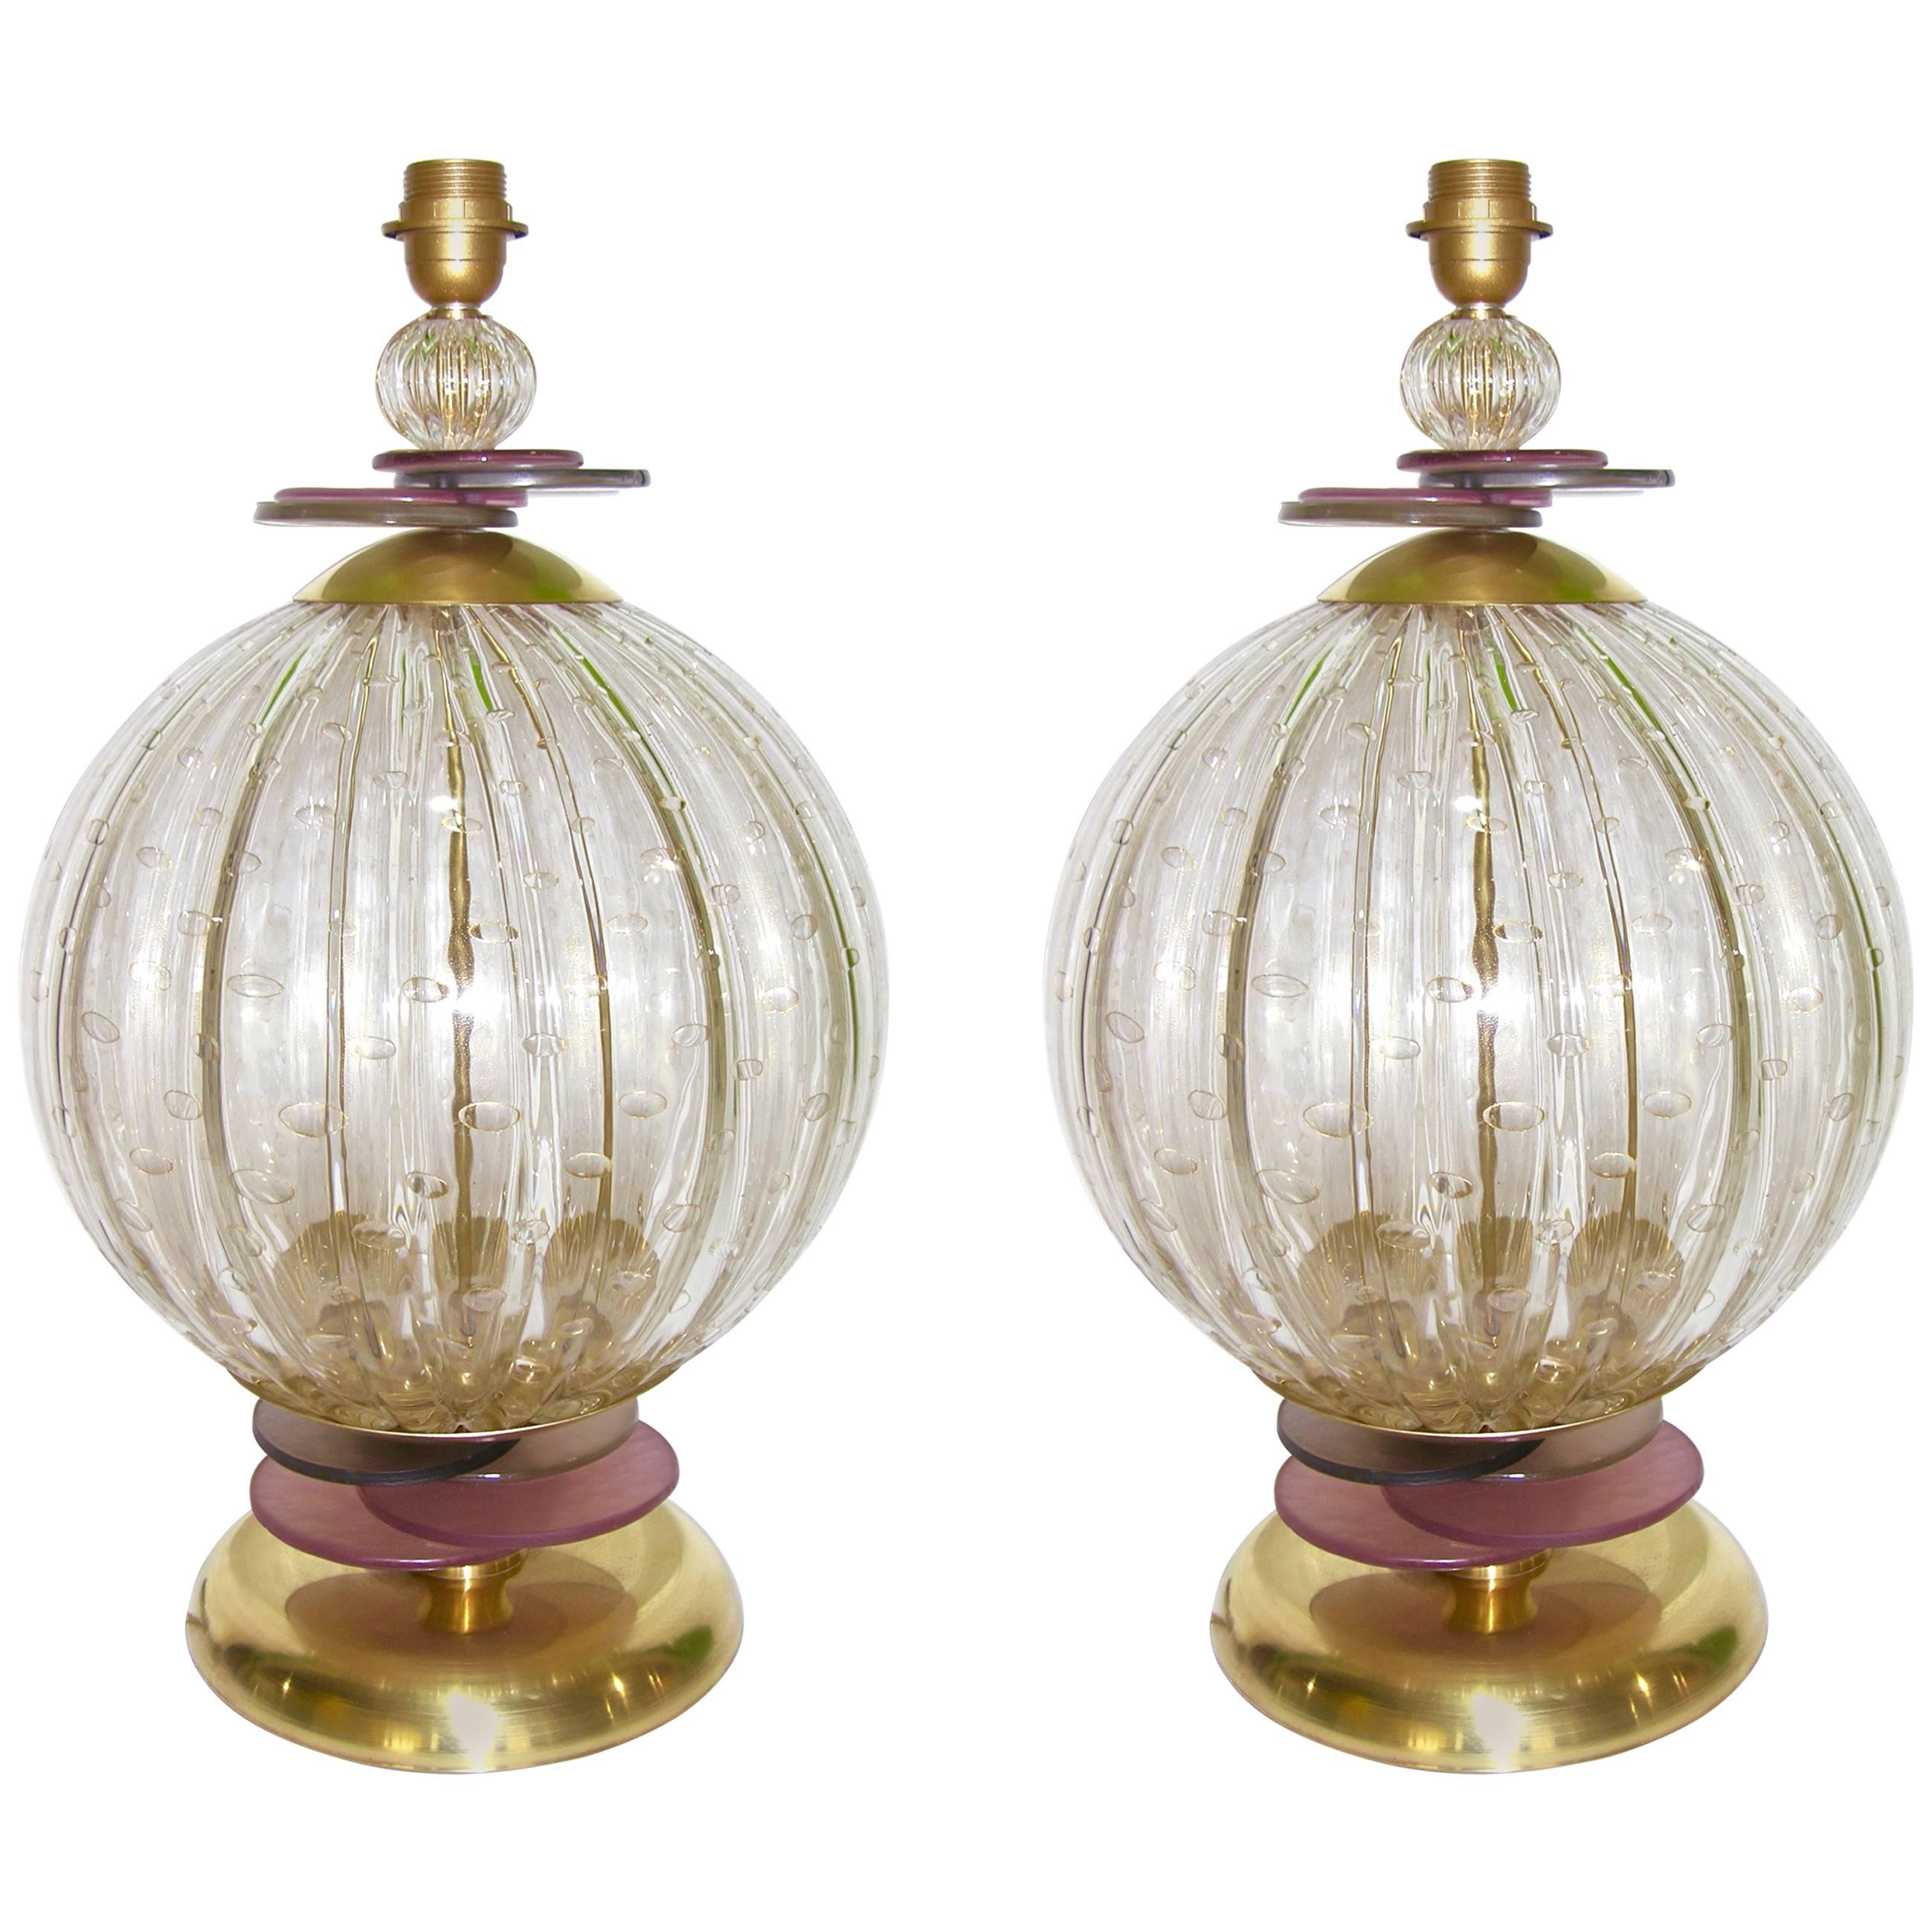 1980s Italian Pair of Round Gold Murano Glass Lamps with Purple and Gray Accents